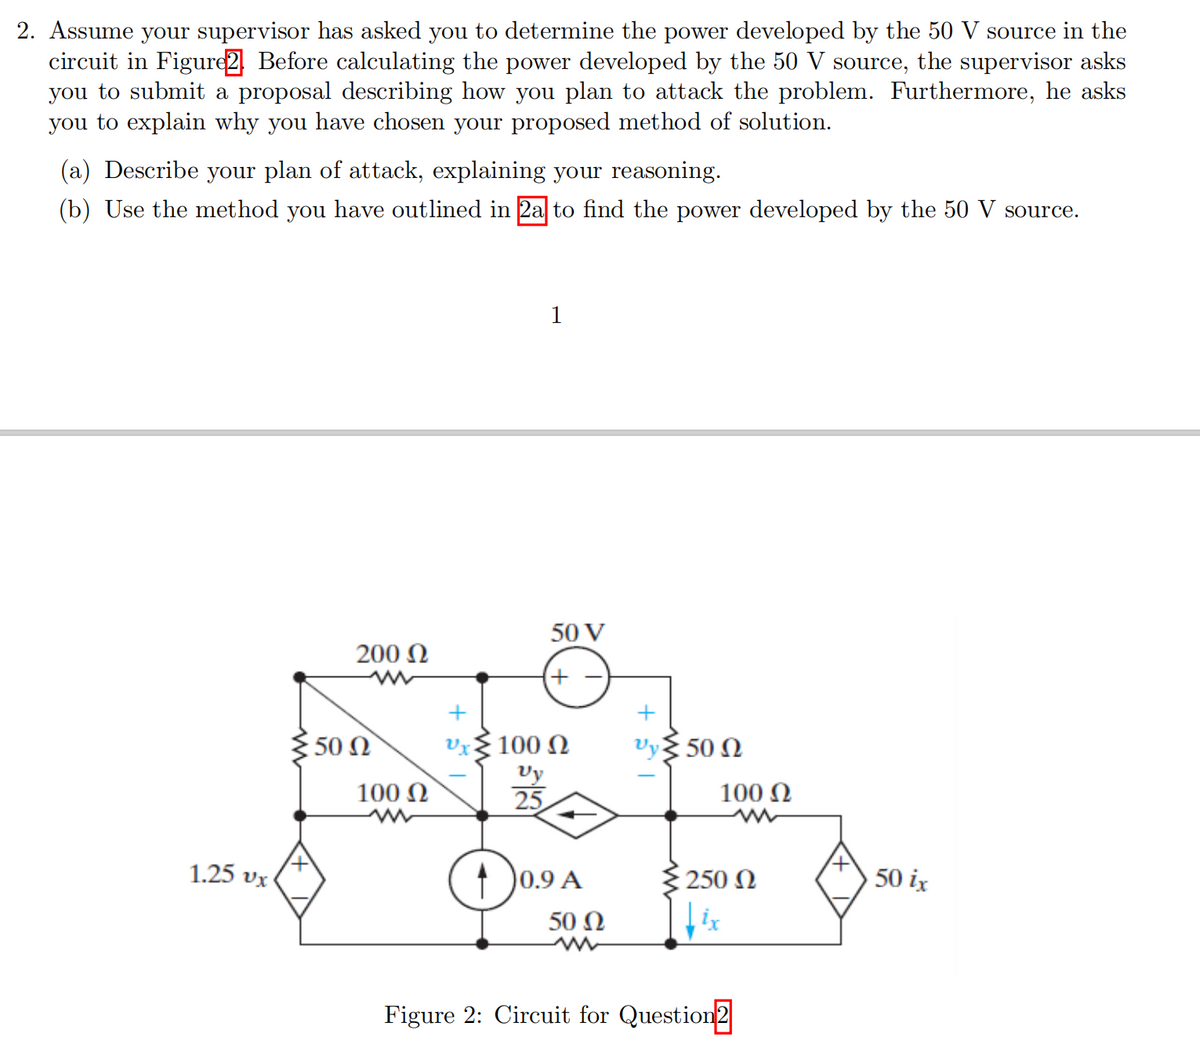 2. Assume your supervisor has asked you to determine the power developed by the 50 V source in the
circuit in Figure2 Before calculating the power developed by the 50 V source, the supervisor asks
you to submit a proposal describing how you plan to attack the problem. Furthermore, he asks
you to explain why you have chosen your proposed method of solution.
(a) Describe your plan of attack, explaining your reasoning.
(b) Use the method you have outlined in 2a to find the power developed by the 50 V source.
1
50 V
200 N
50 Ω
100 N
Vy 50 N
Vy
25
100 N
100 N
Das
1.25 vx
0.9 A
{ 250 N
50 ix
50 Ω
Figure 2: Circuit for Question2
